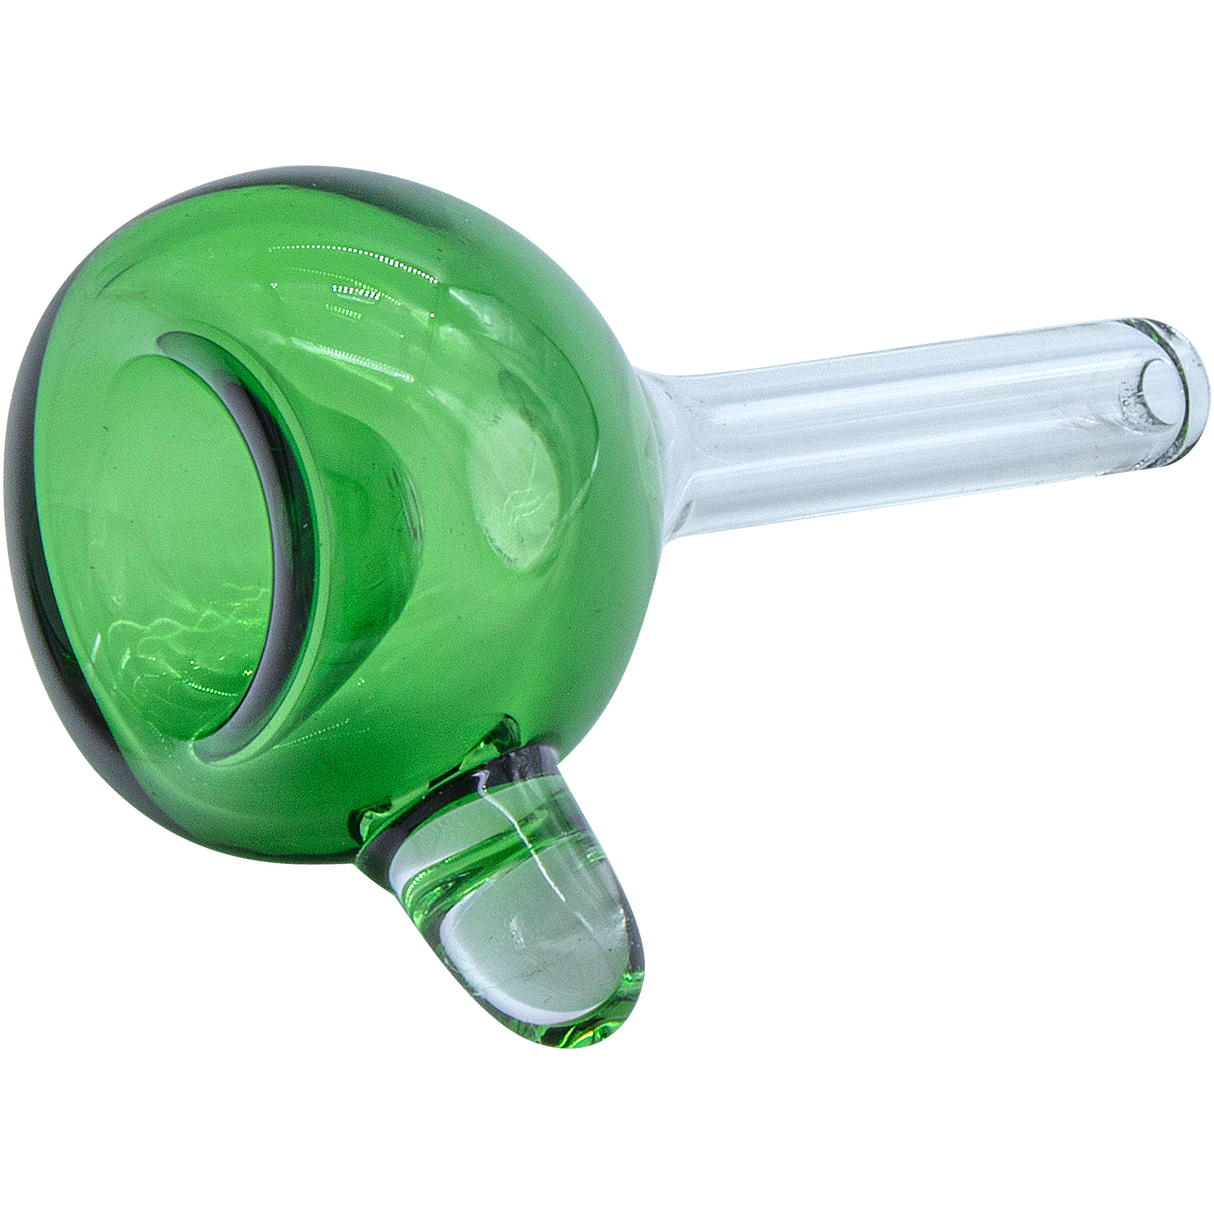 LA Pipes Bubble Bowl Pull-Stem Slide in Green, Borosilicate Glass, Grommet Joint - Top View